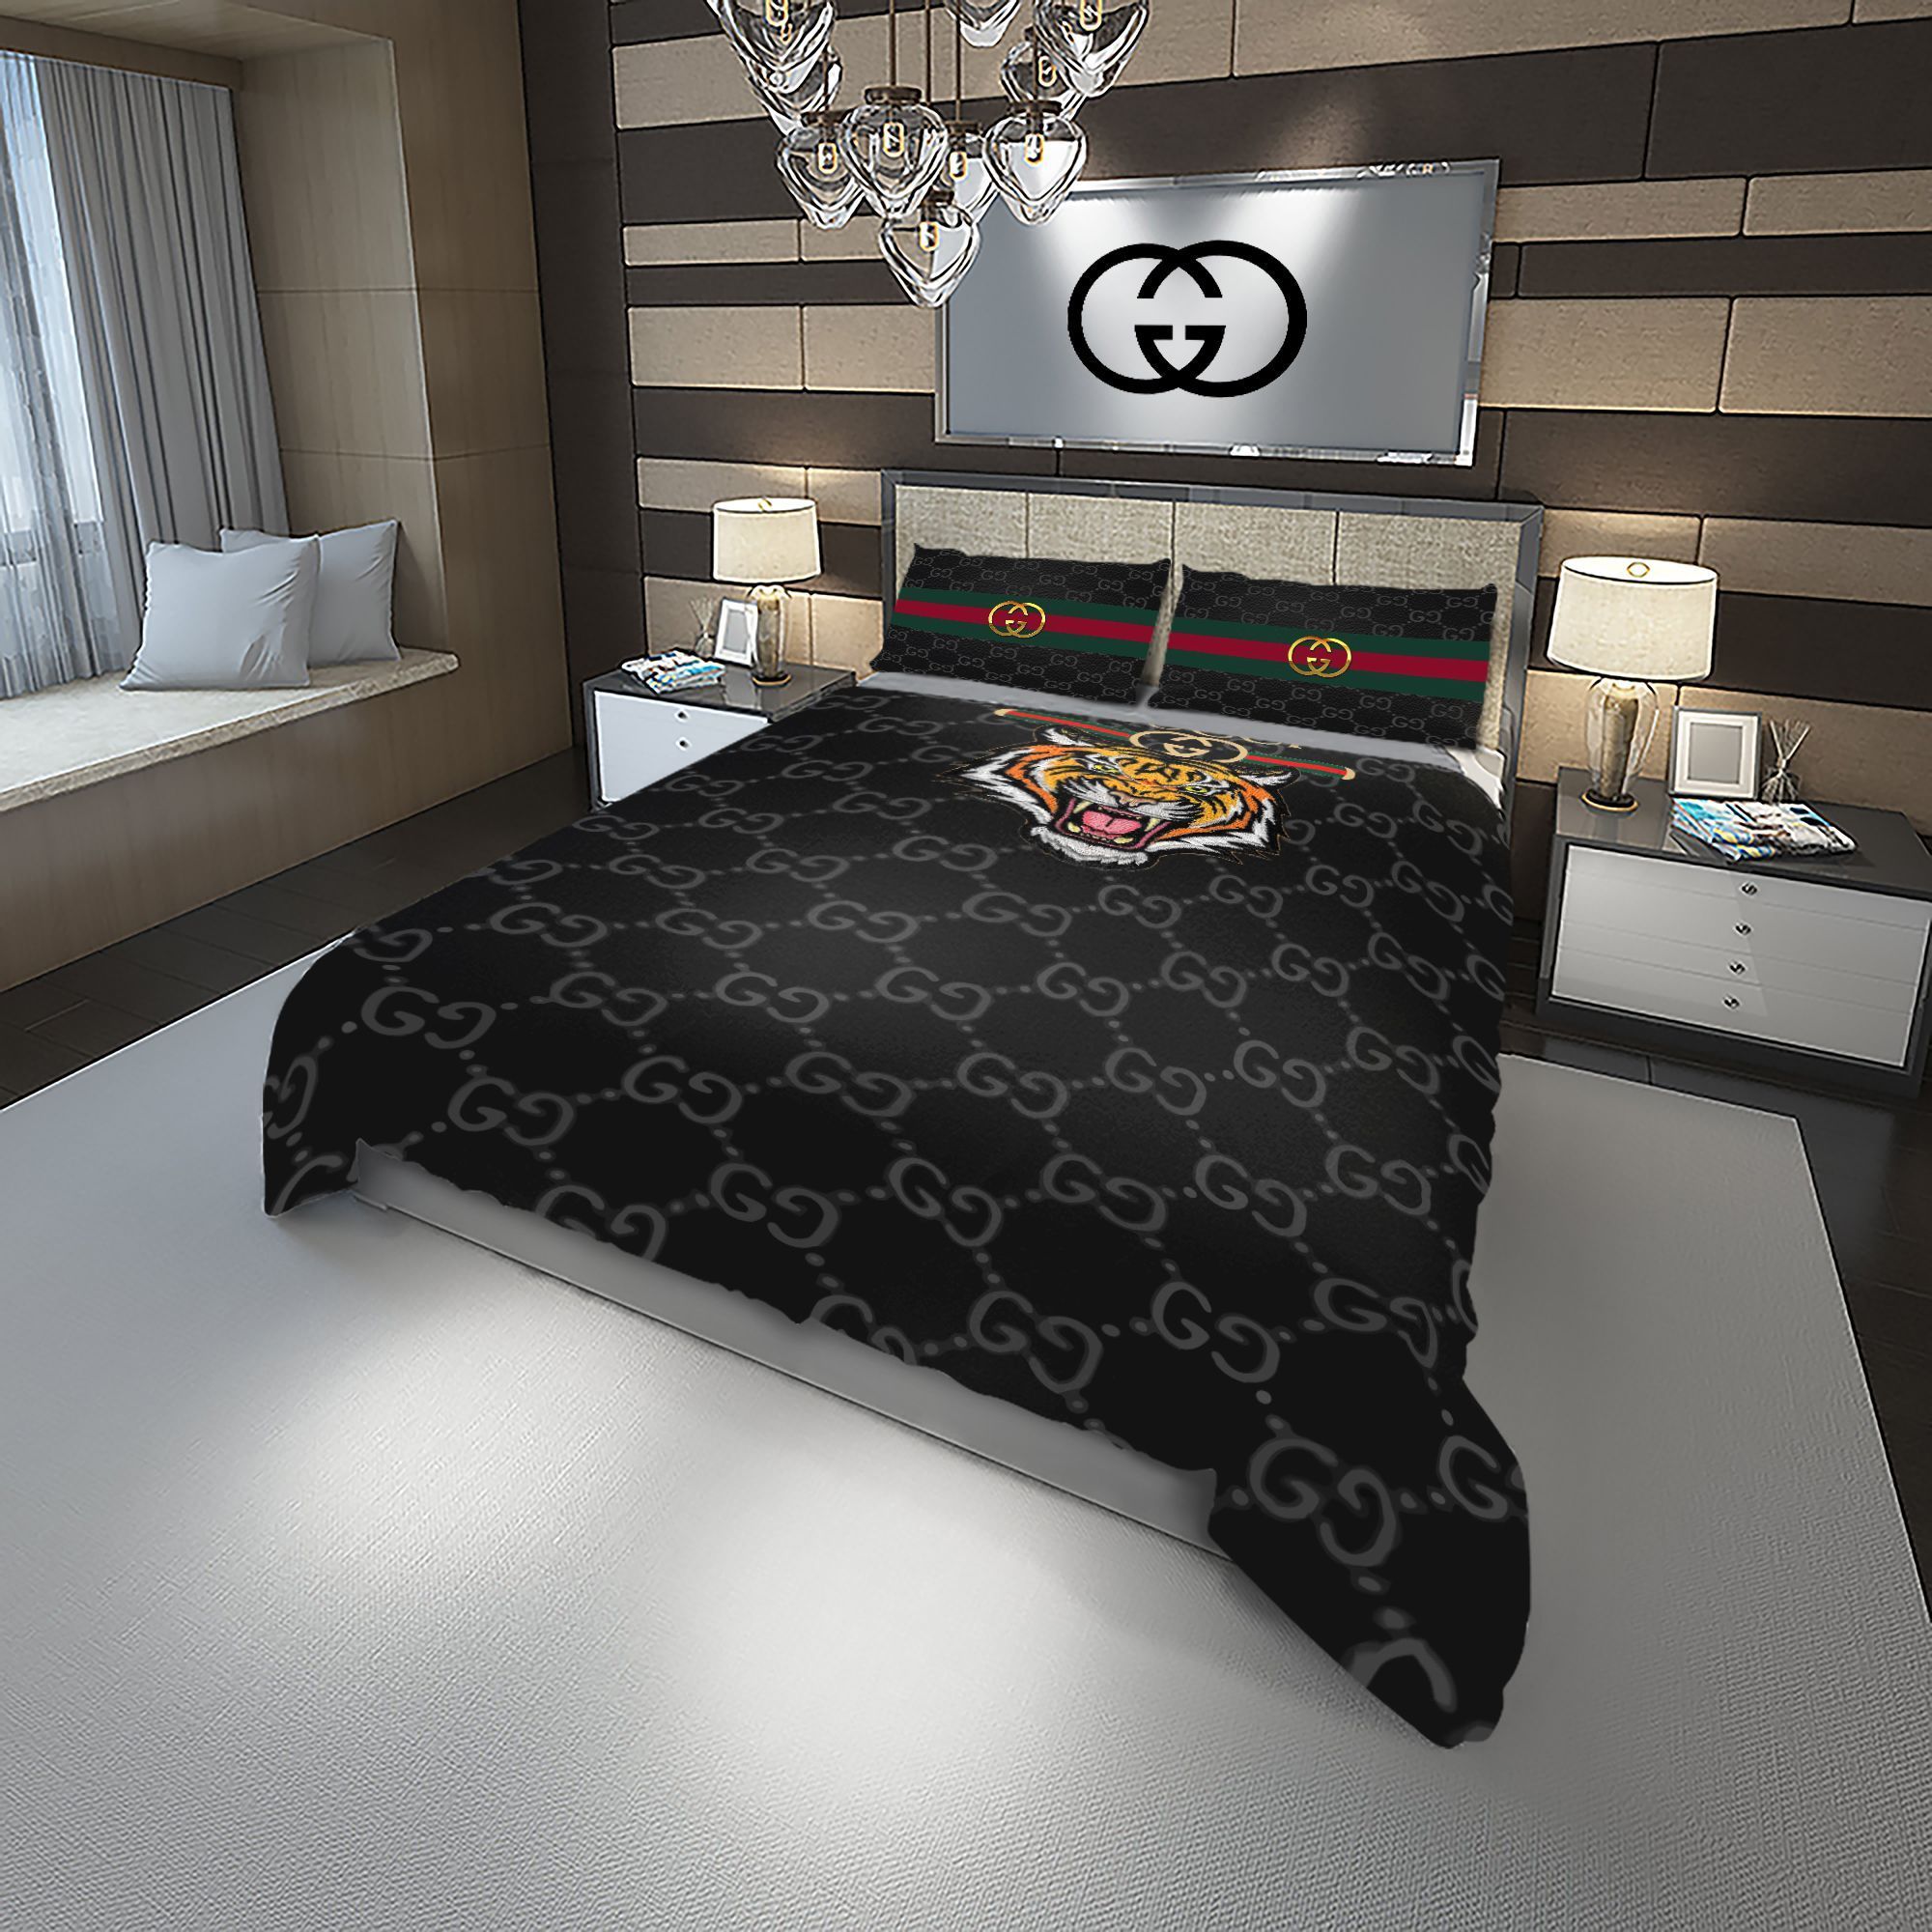 Let me show you about some luxury brand bedding set 2022 39